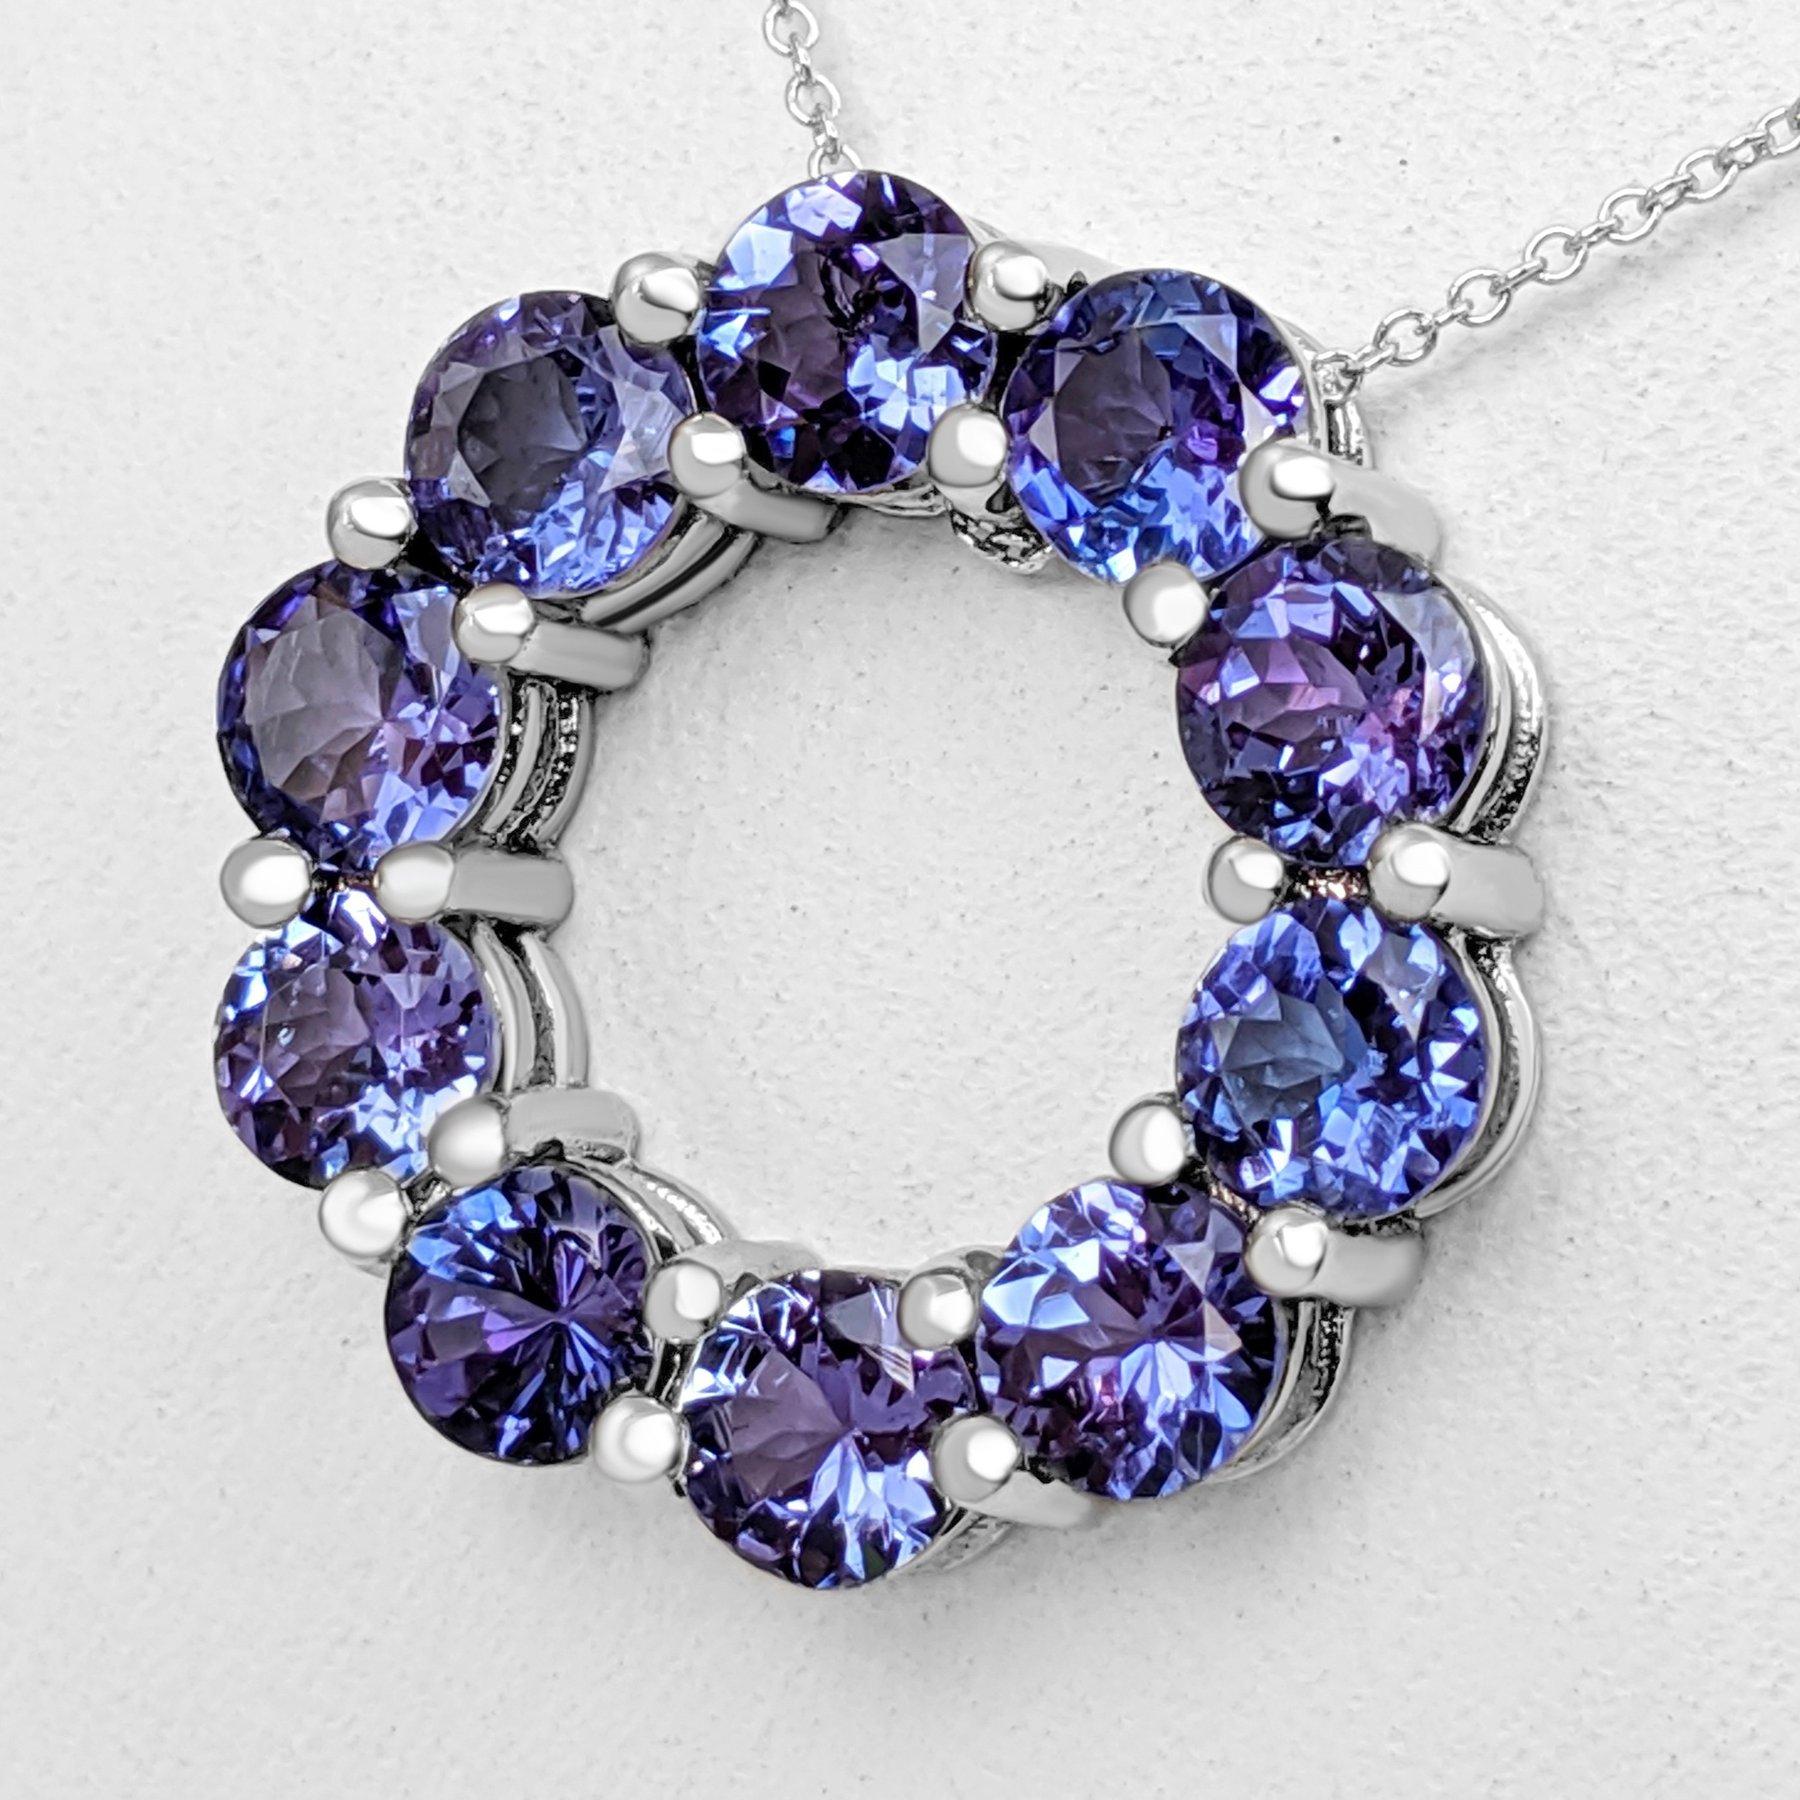 $1 NO RESERVE!   5.23cttw Tanzanite, 14K White Gold Necklace With Pendant 1